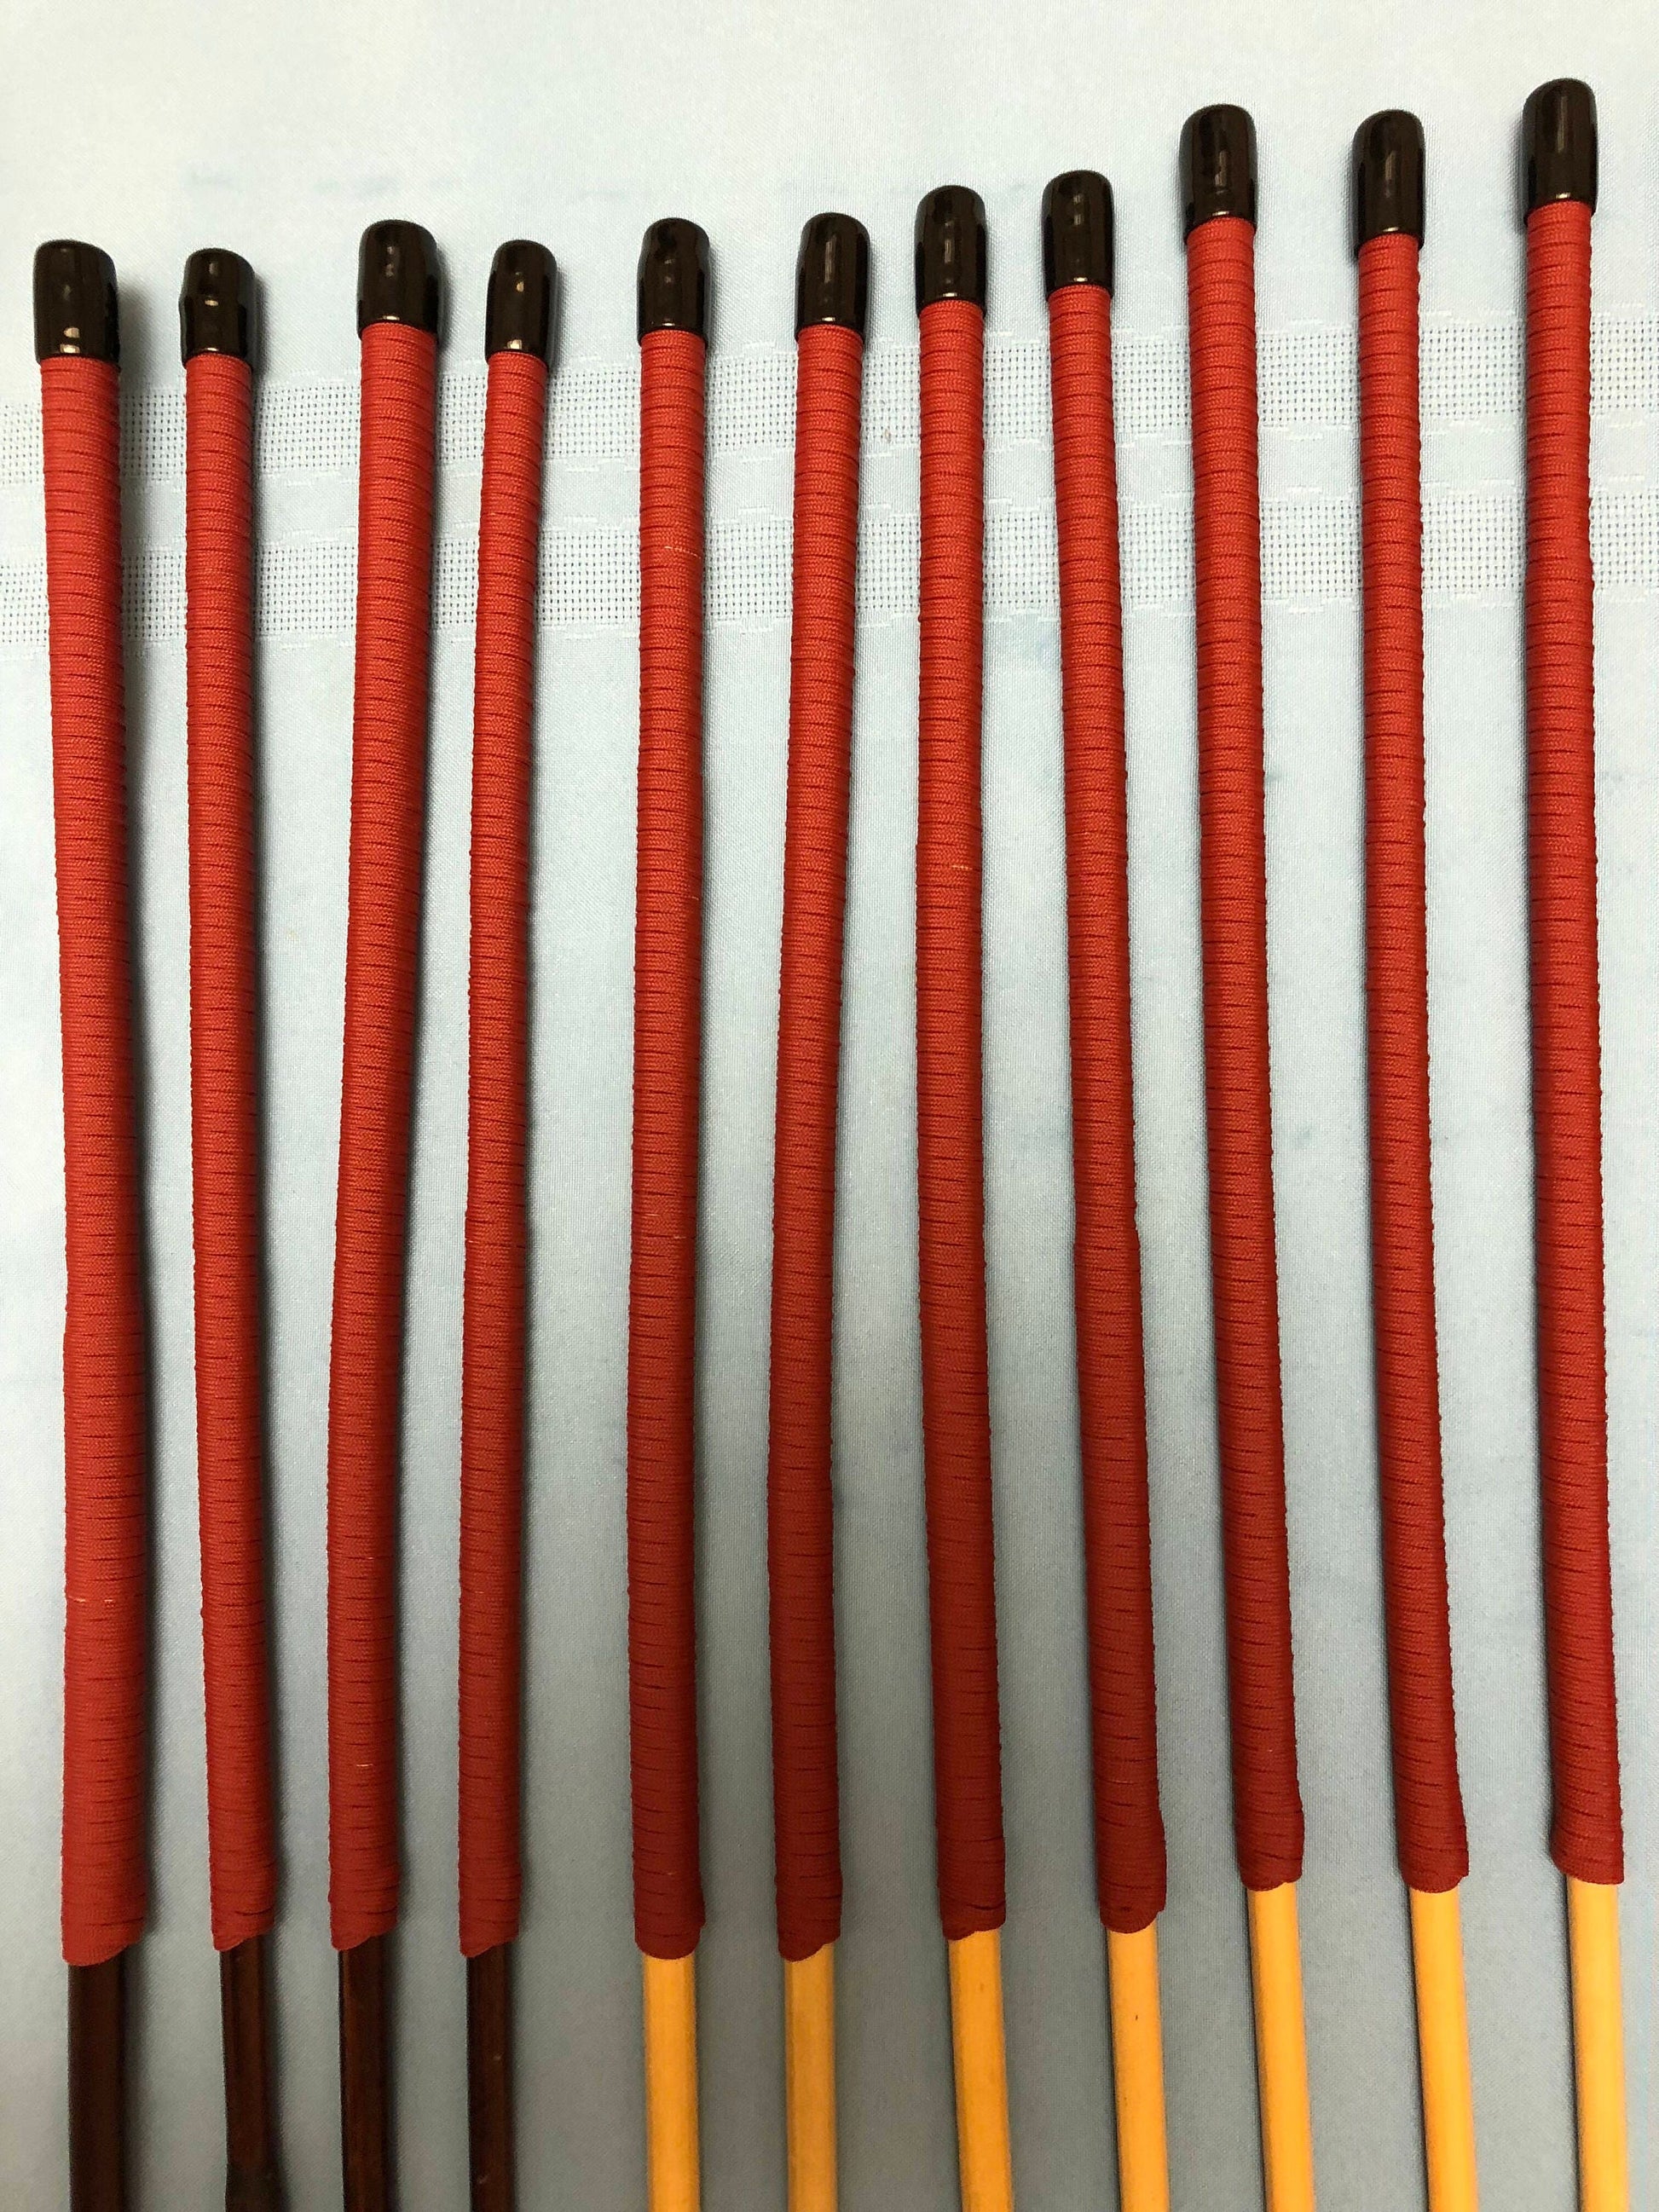 Set of 12 Whippy Smoked Dragon Canes / Classic Dragon Canes / Thin Stingy Canes / Falaka Canes -  Red Paracord Handles